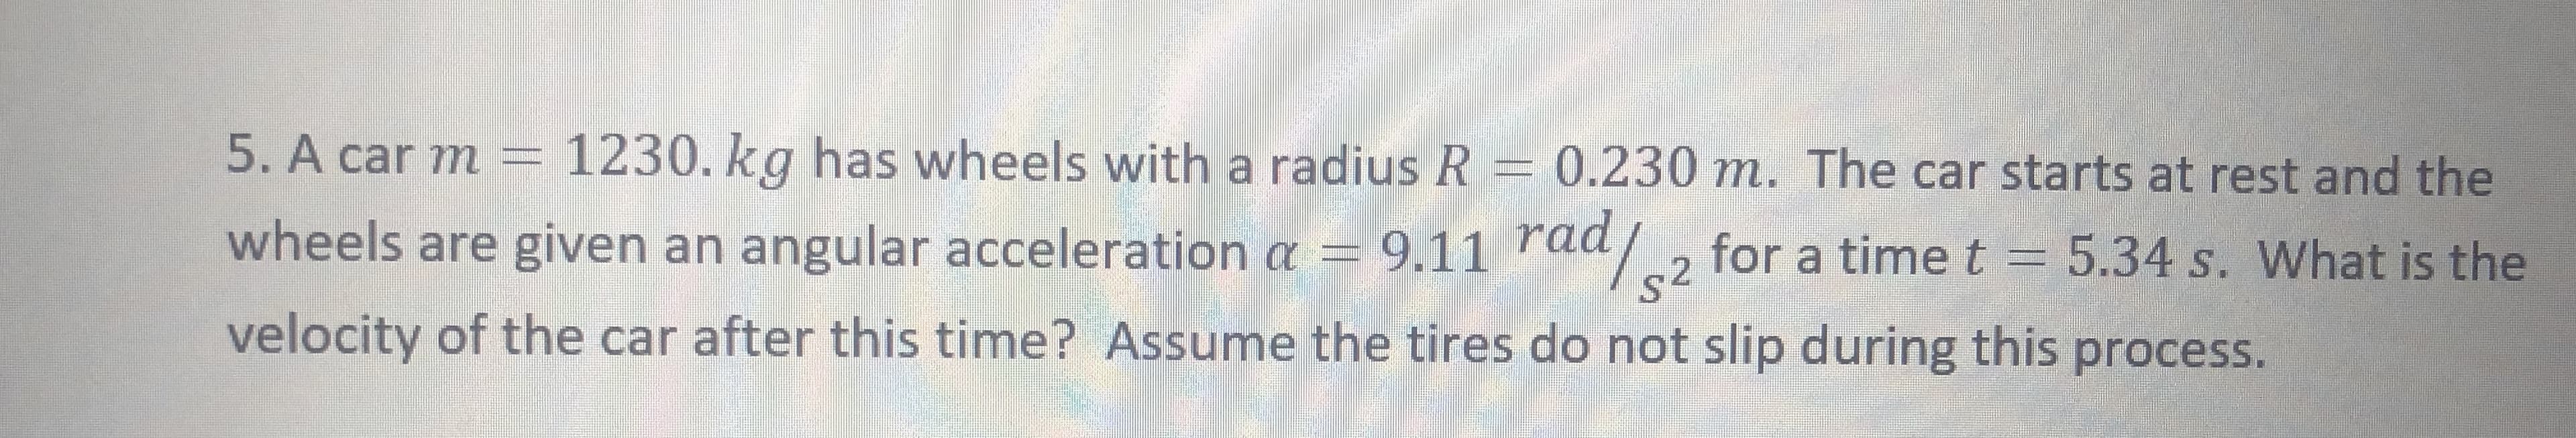 5. A car m = 1230. kg has wheels with a radius R = 0.230 m. The car starts at rest and the
wheels are given an angular acceleration a = 9.11 raa2
velocity of the car after this time? Assume the tires do not slip during this process.
s2
for a time t = 5.34 s. What is the
